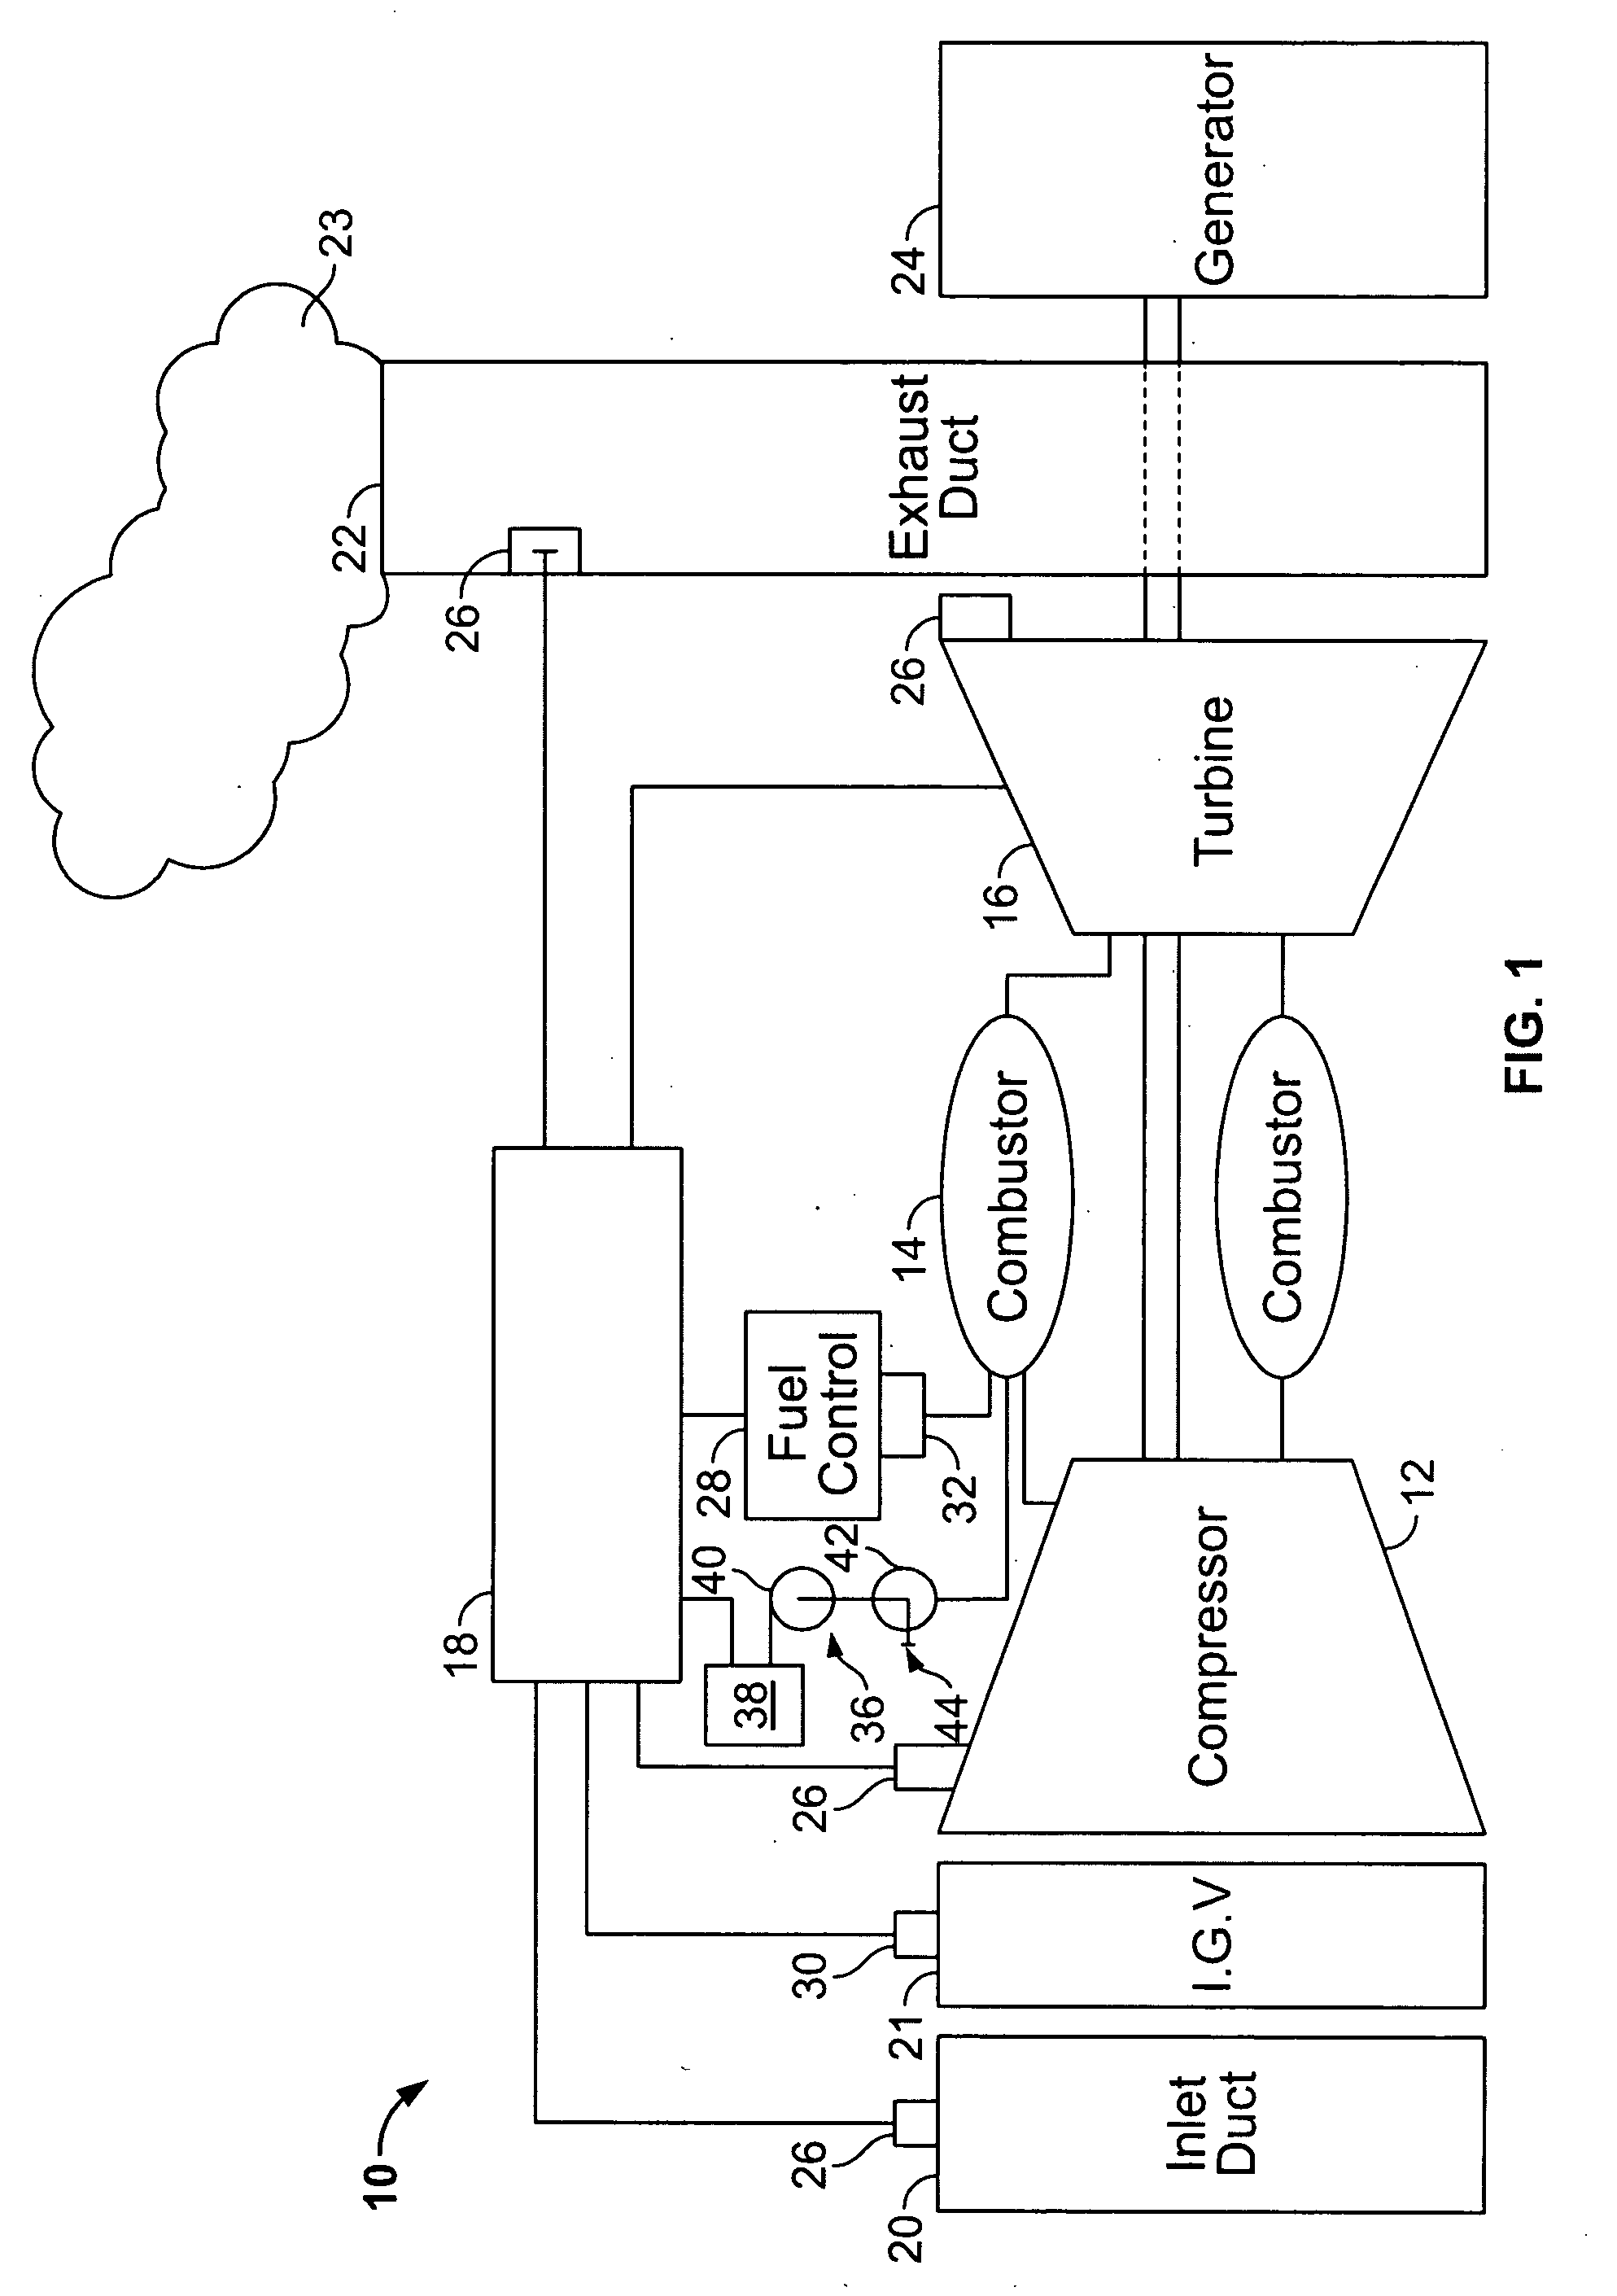 Methods and systems for low emission gas turbine energy generation